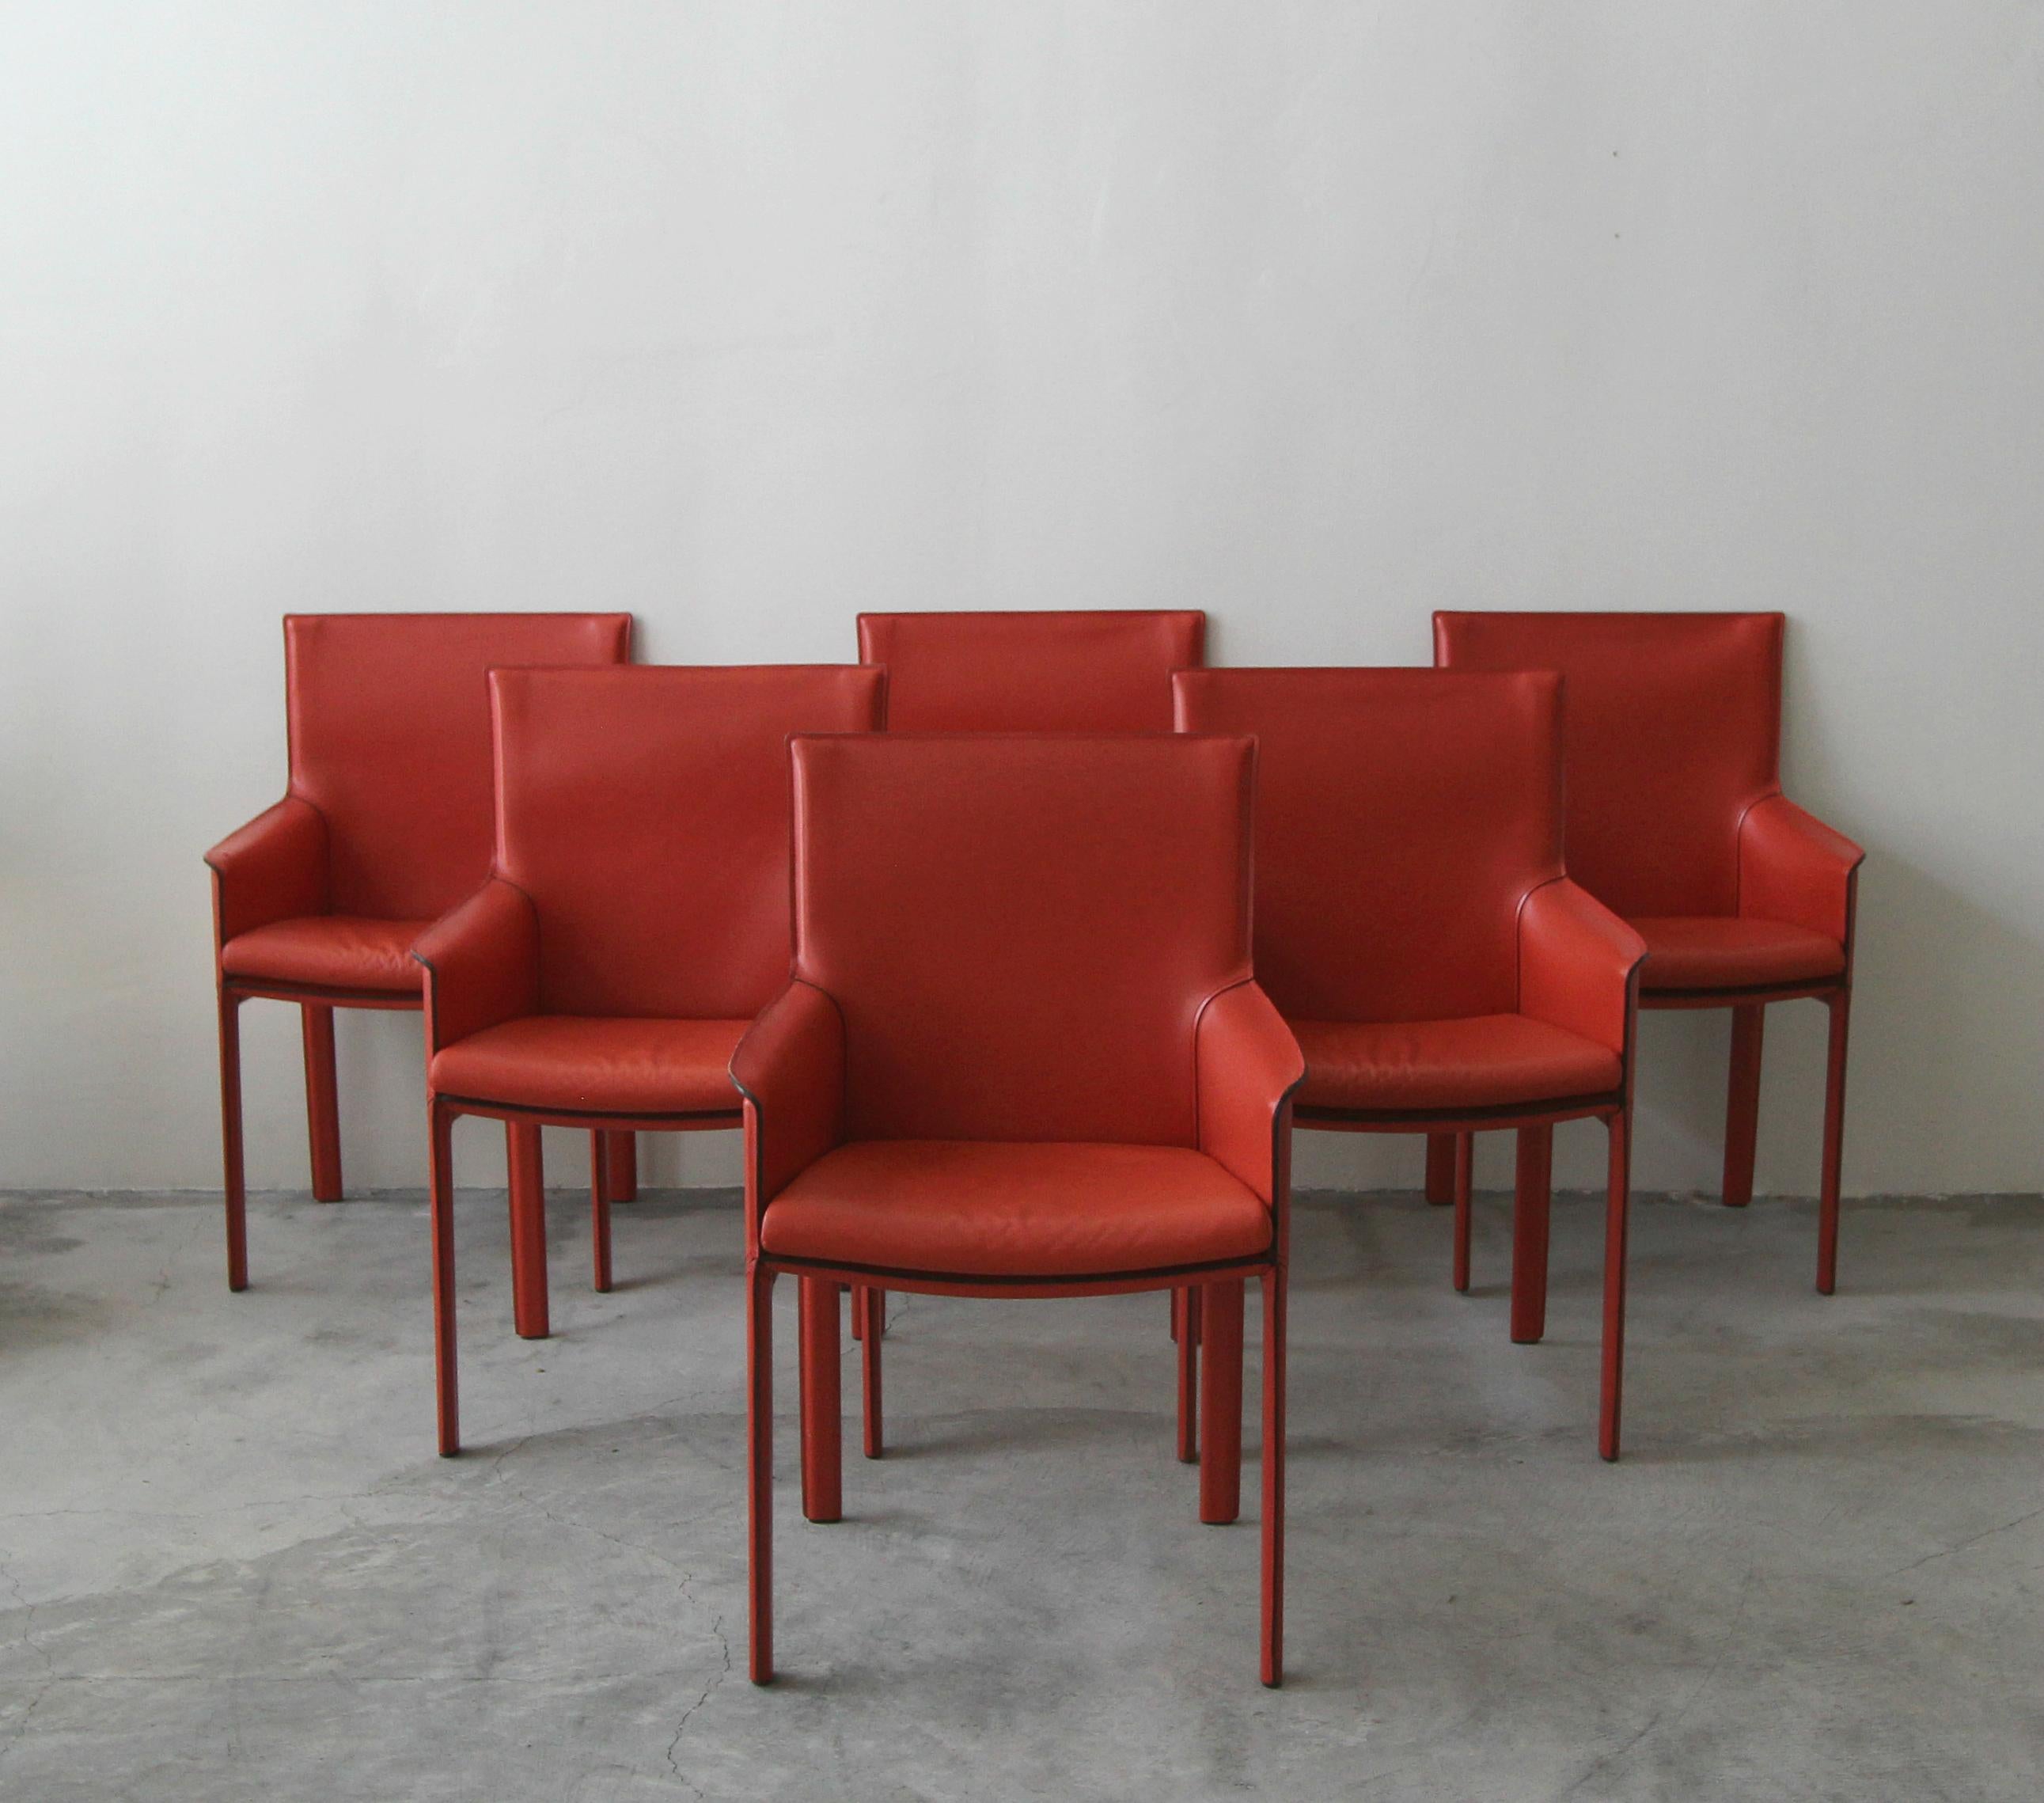 Gorgeous set of 6 Enrico Pellizzoni Pasqualina armchairs designed by Grassi & Bianchi. These chairs were custom ordered straight from Italy. They are covered in the most gorgeous shade of dark orange all grain leather. Chairs feature, rare vented